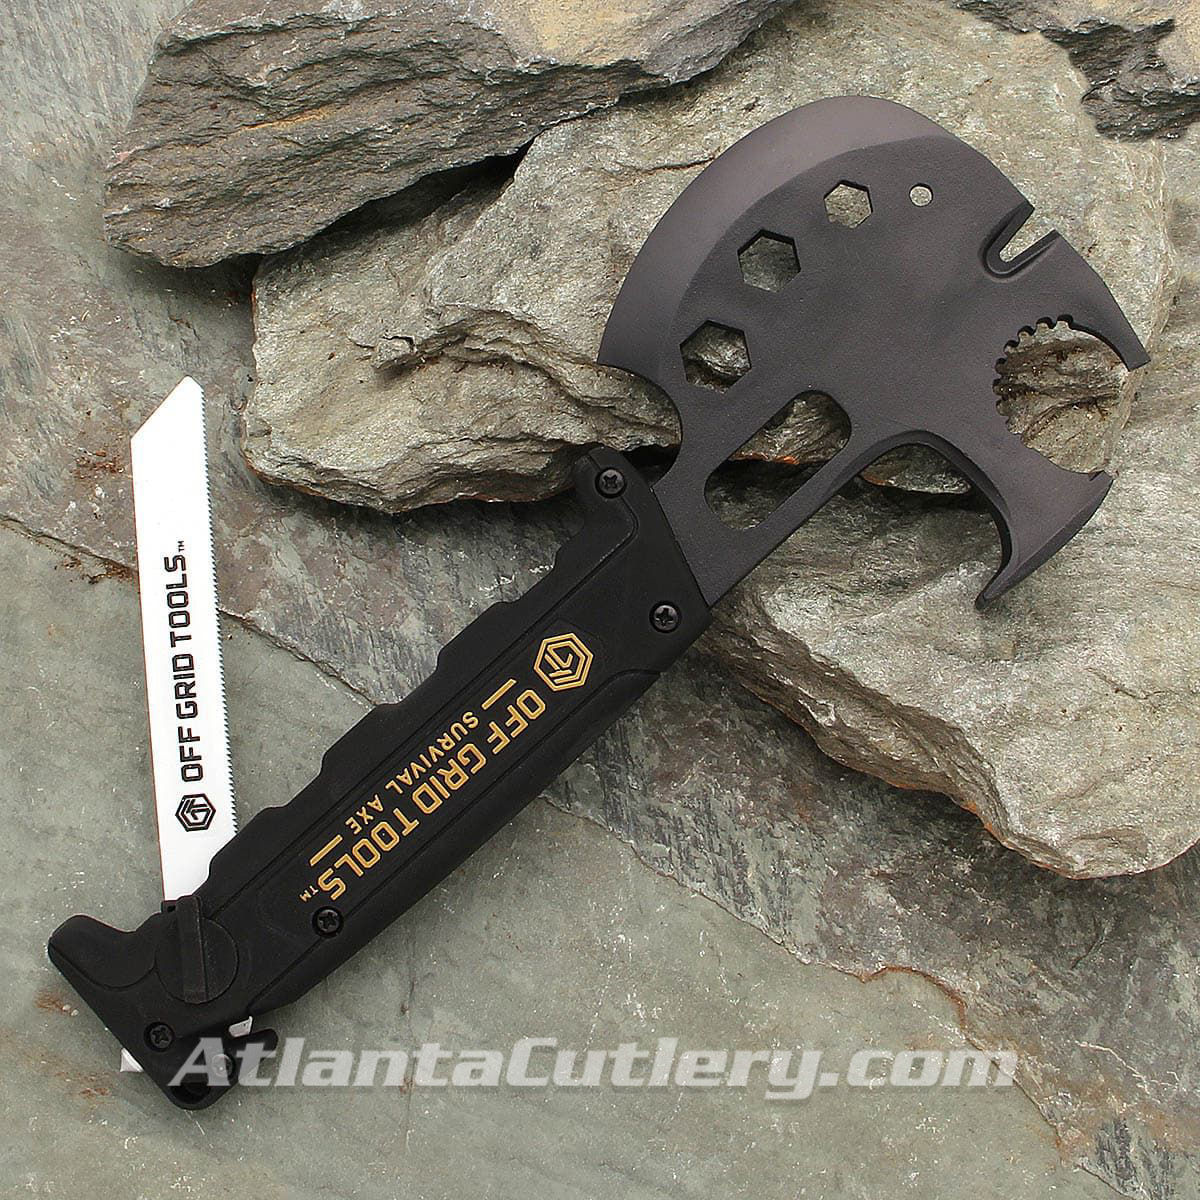 Off Grid Tools Survival Axe